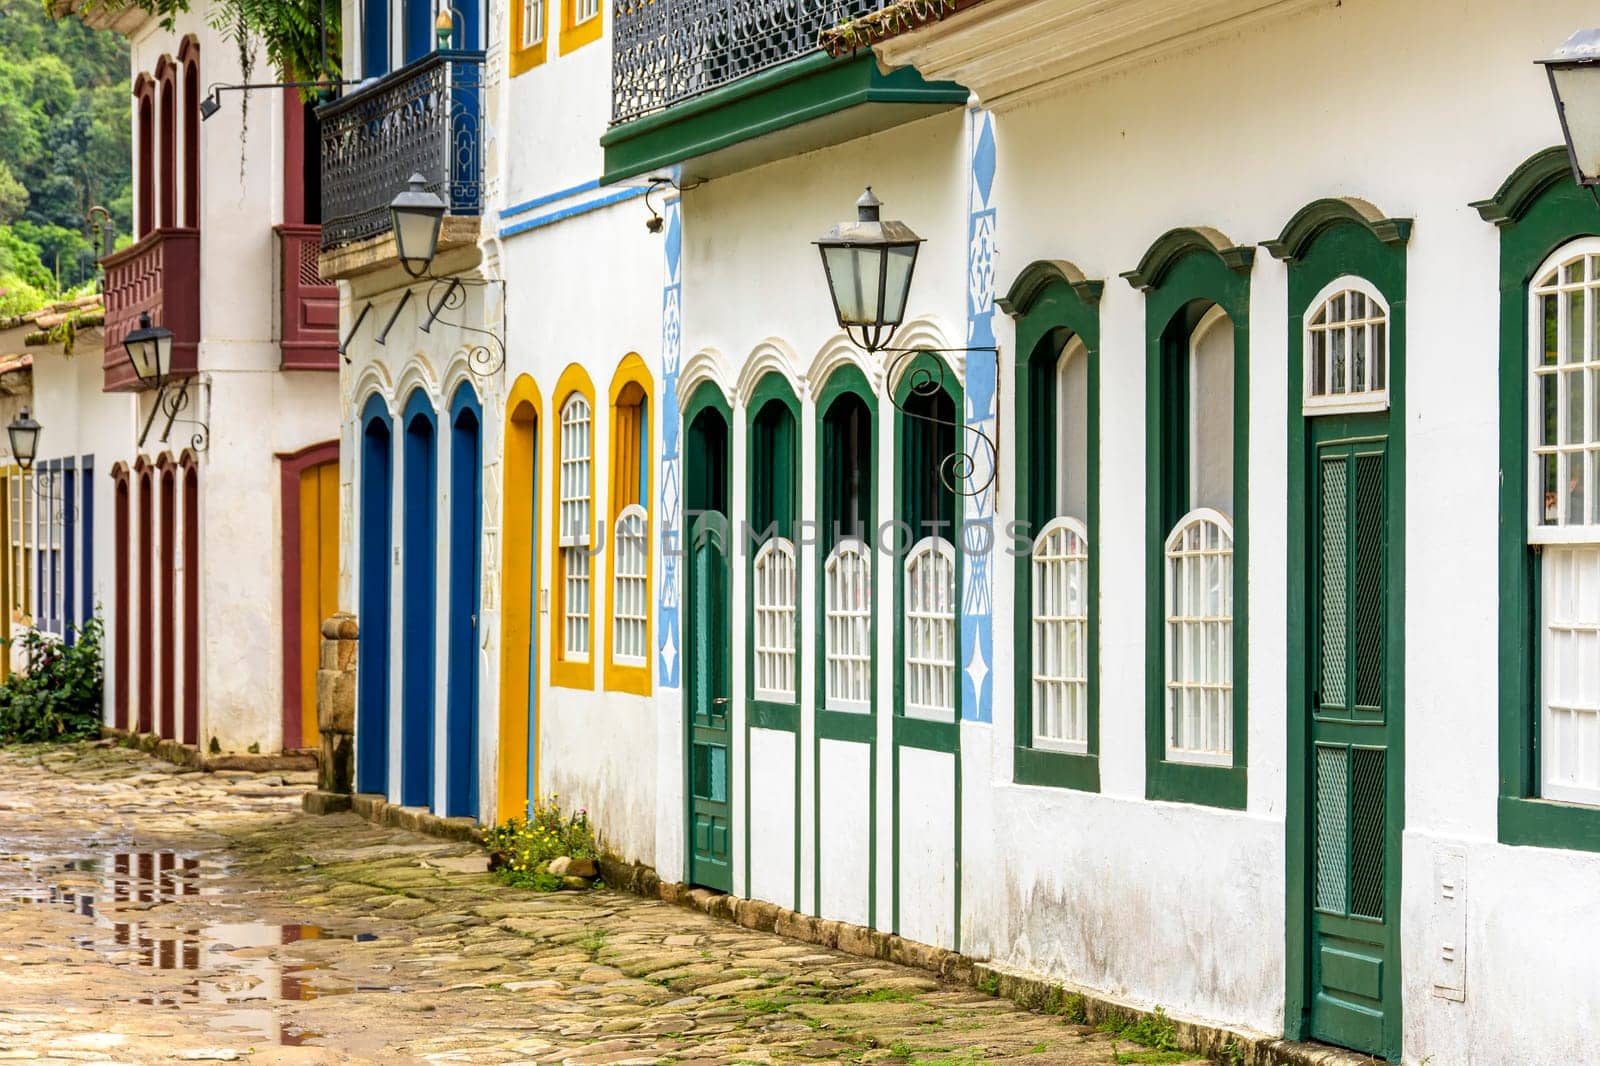 Quiet streets with colorful old colonial-style houses and cobblestones in the historic city of Paraty on the south coast of the state of Rio de Janeiro, Brazil